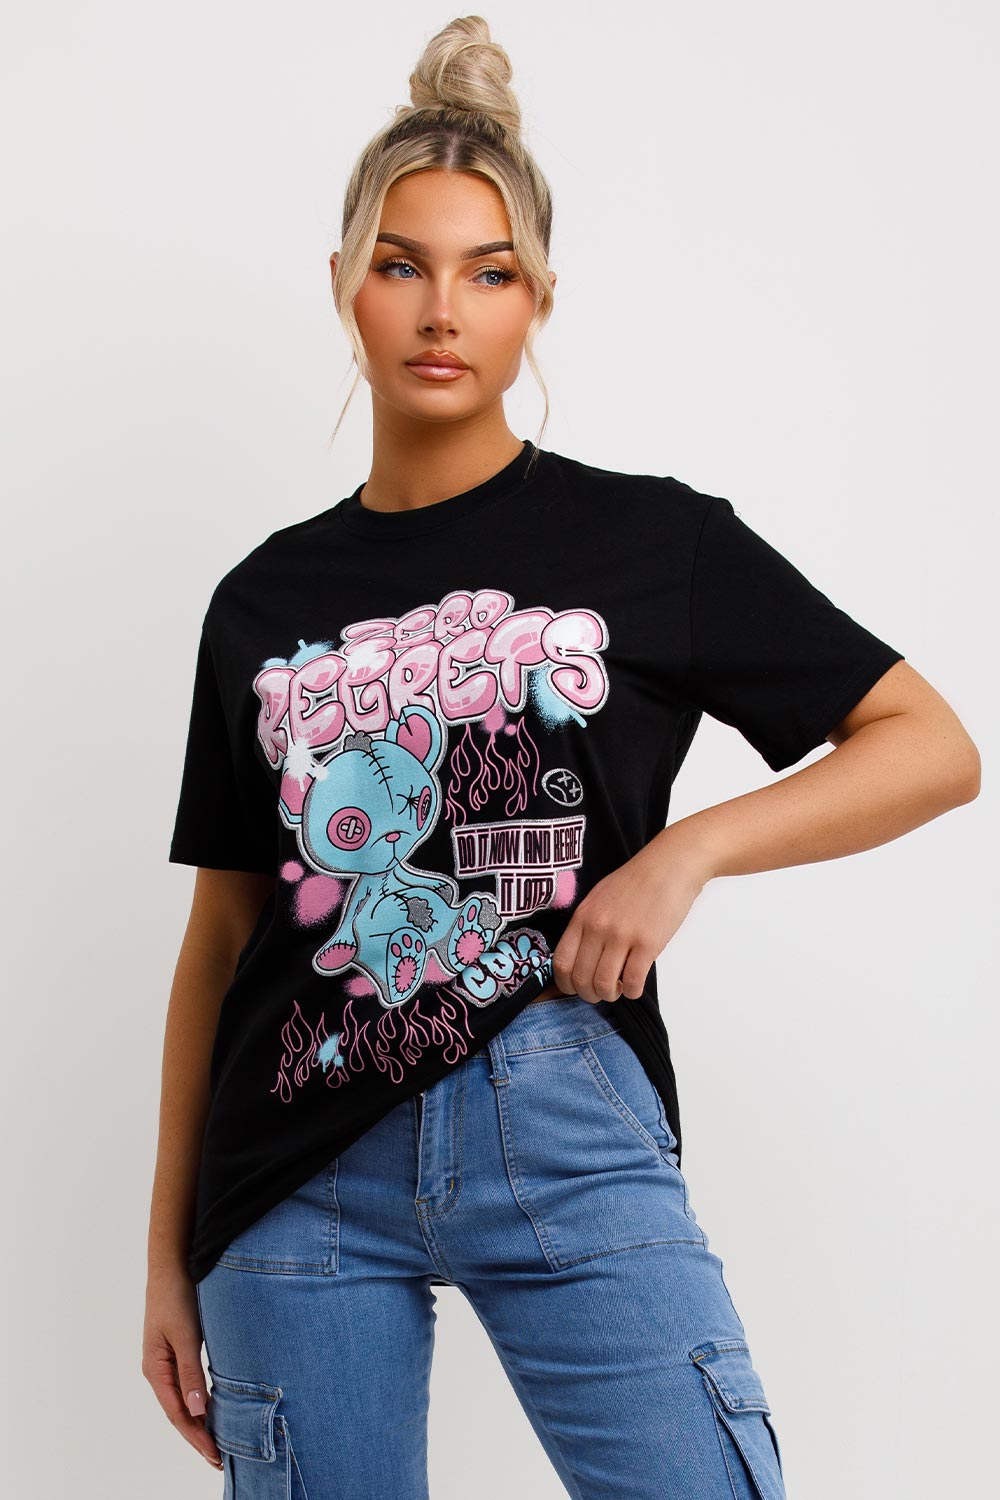 womens black oversized t shirt with teddy bear graphics